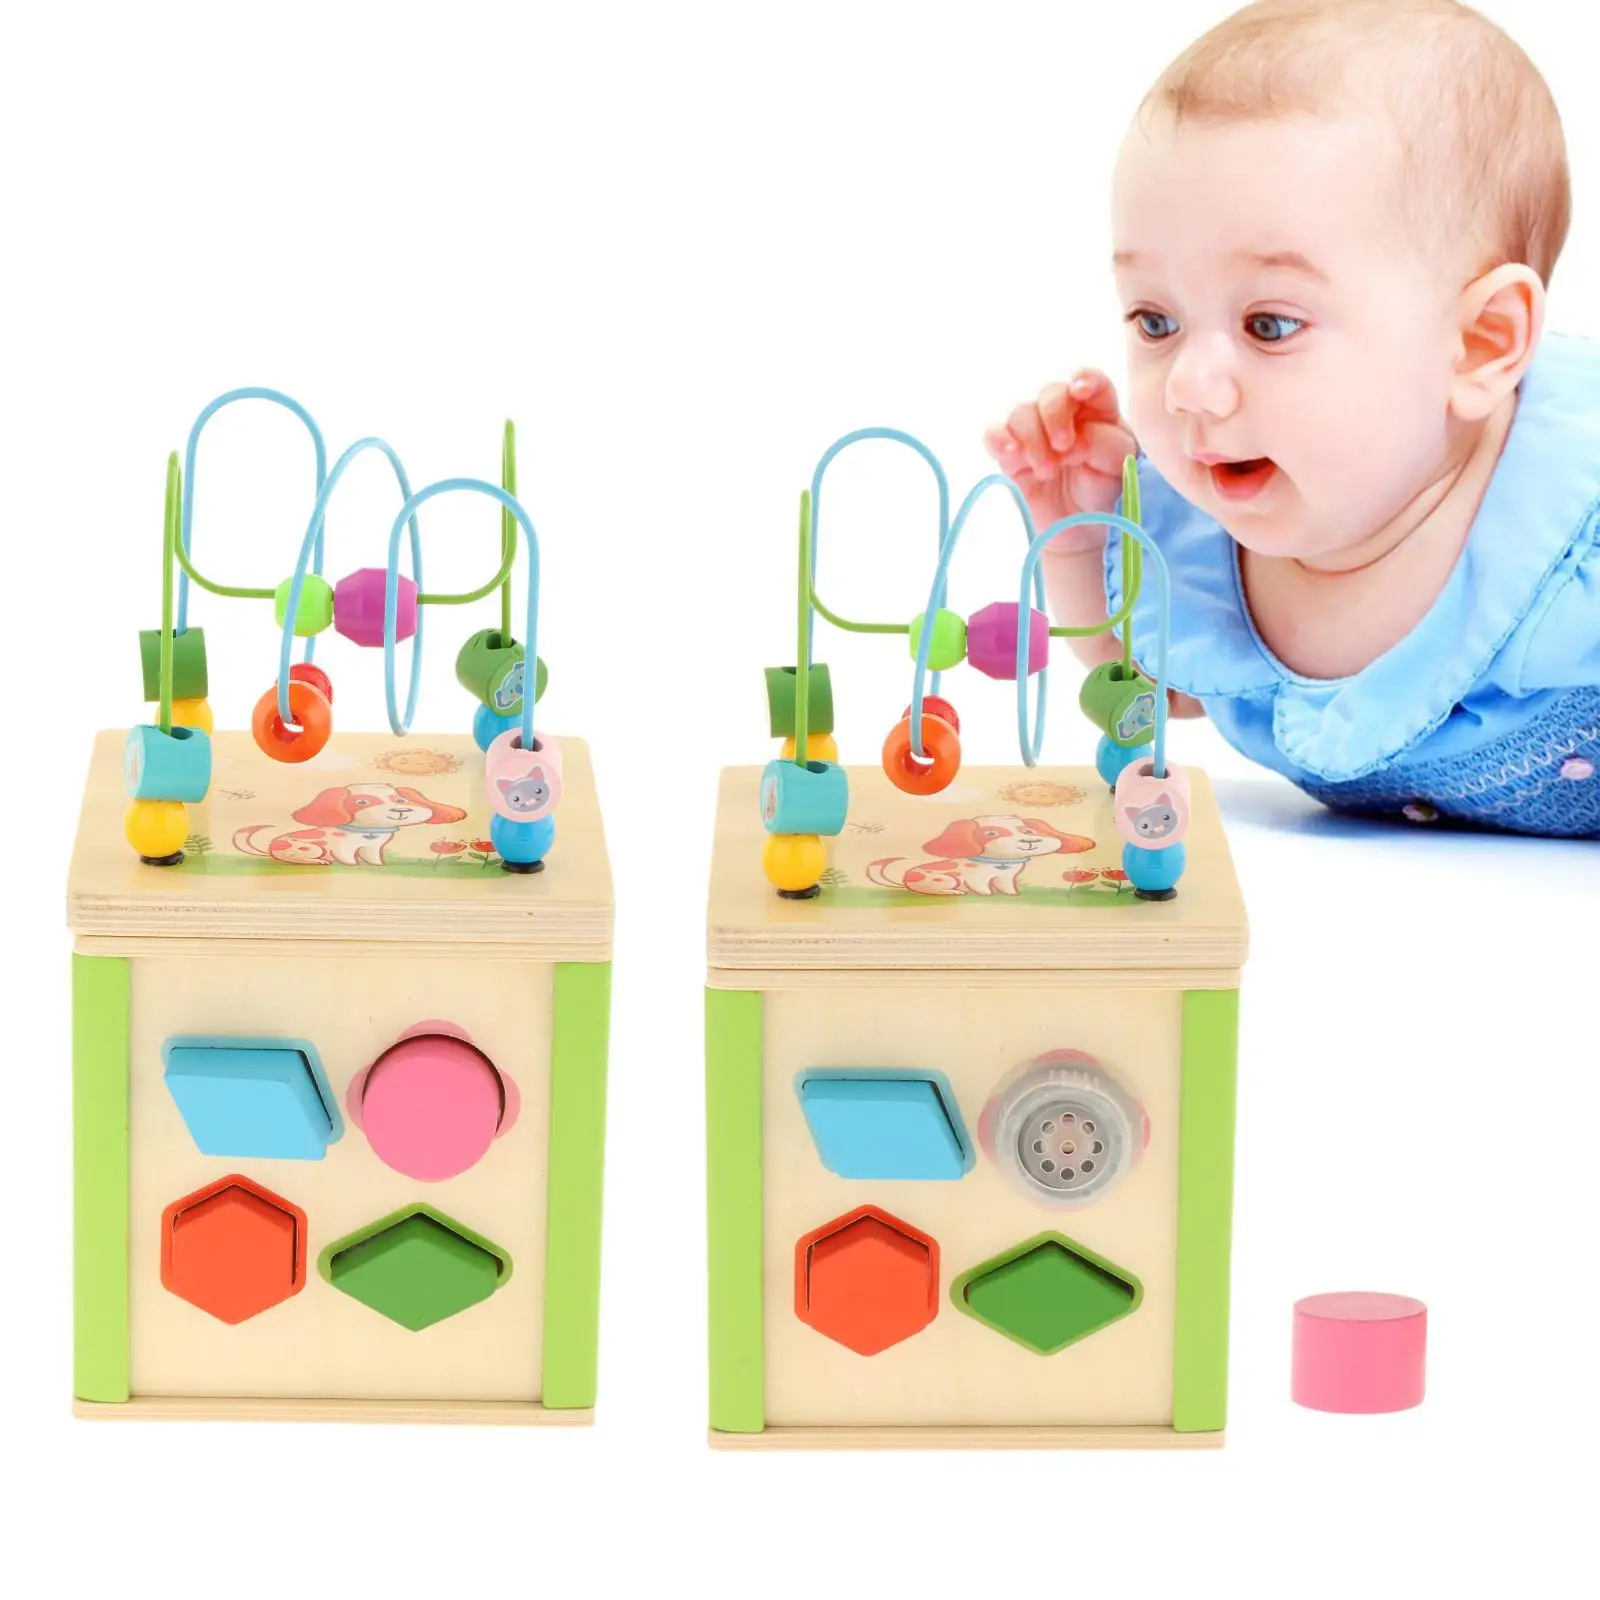 Montessori Wooden Bead Maze Shape Sorter Learning Shape Match Early Education Baby Activity Cubes for Boys Girls Birthday Gift